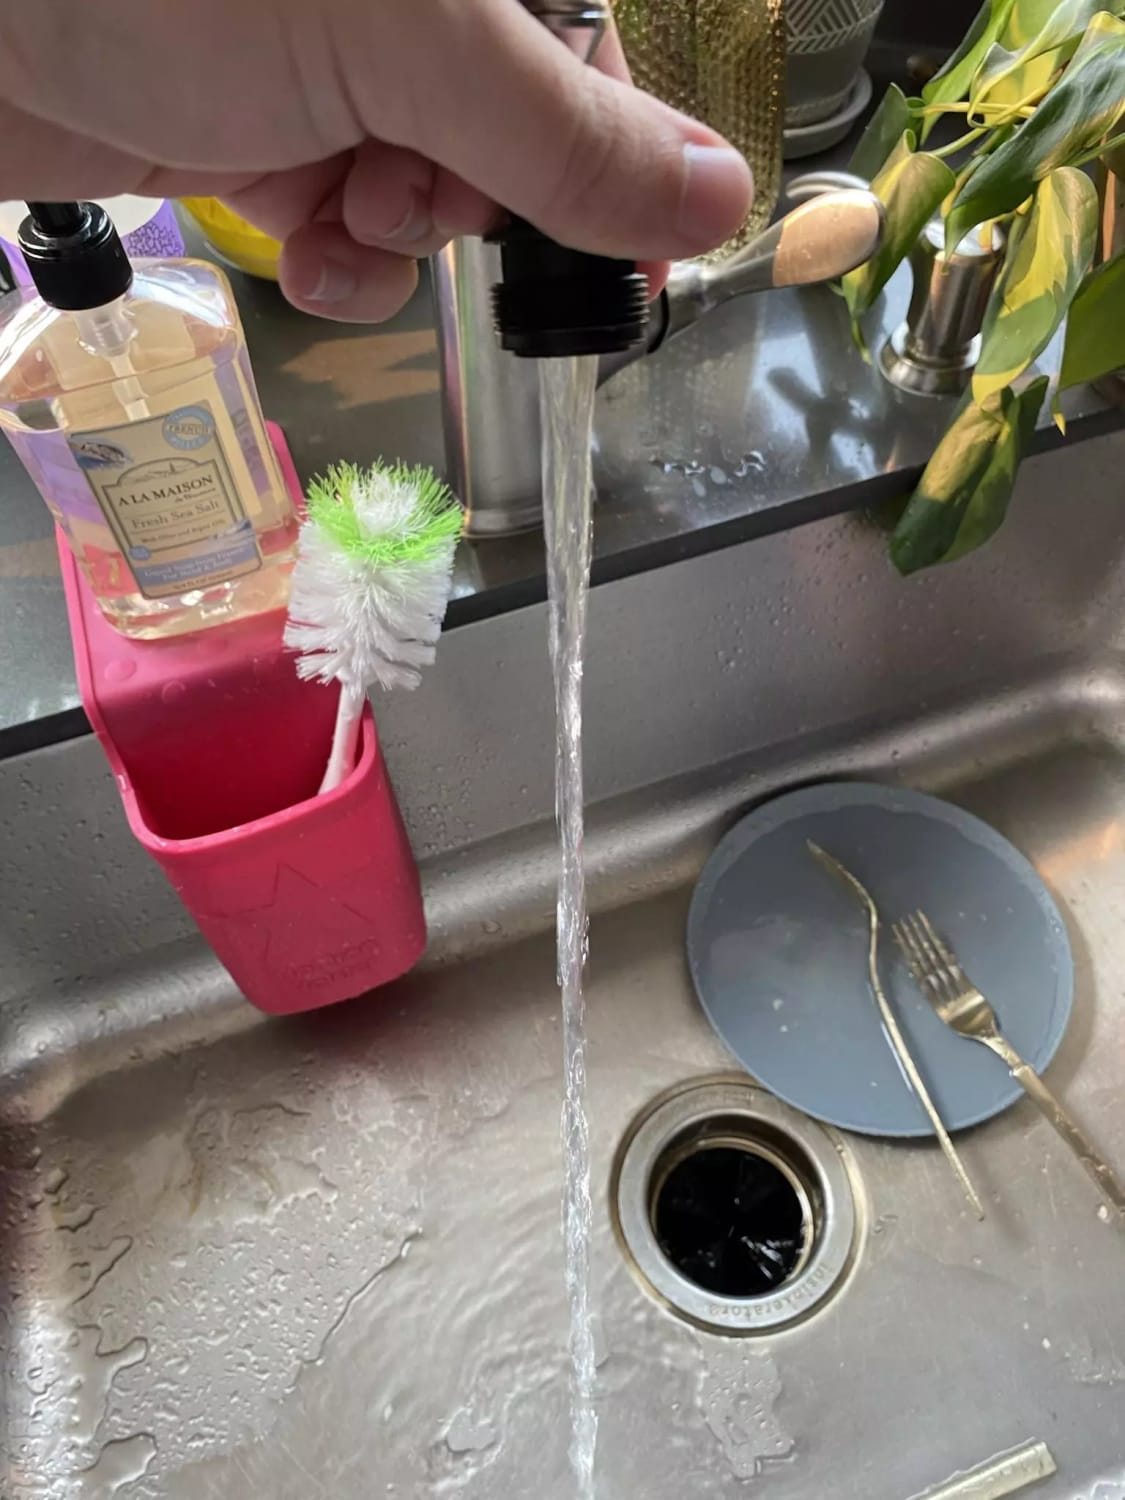 Kitchen faucet has low pressure, but I’m not sure how to diagnose the cause.